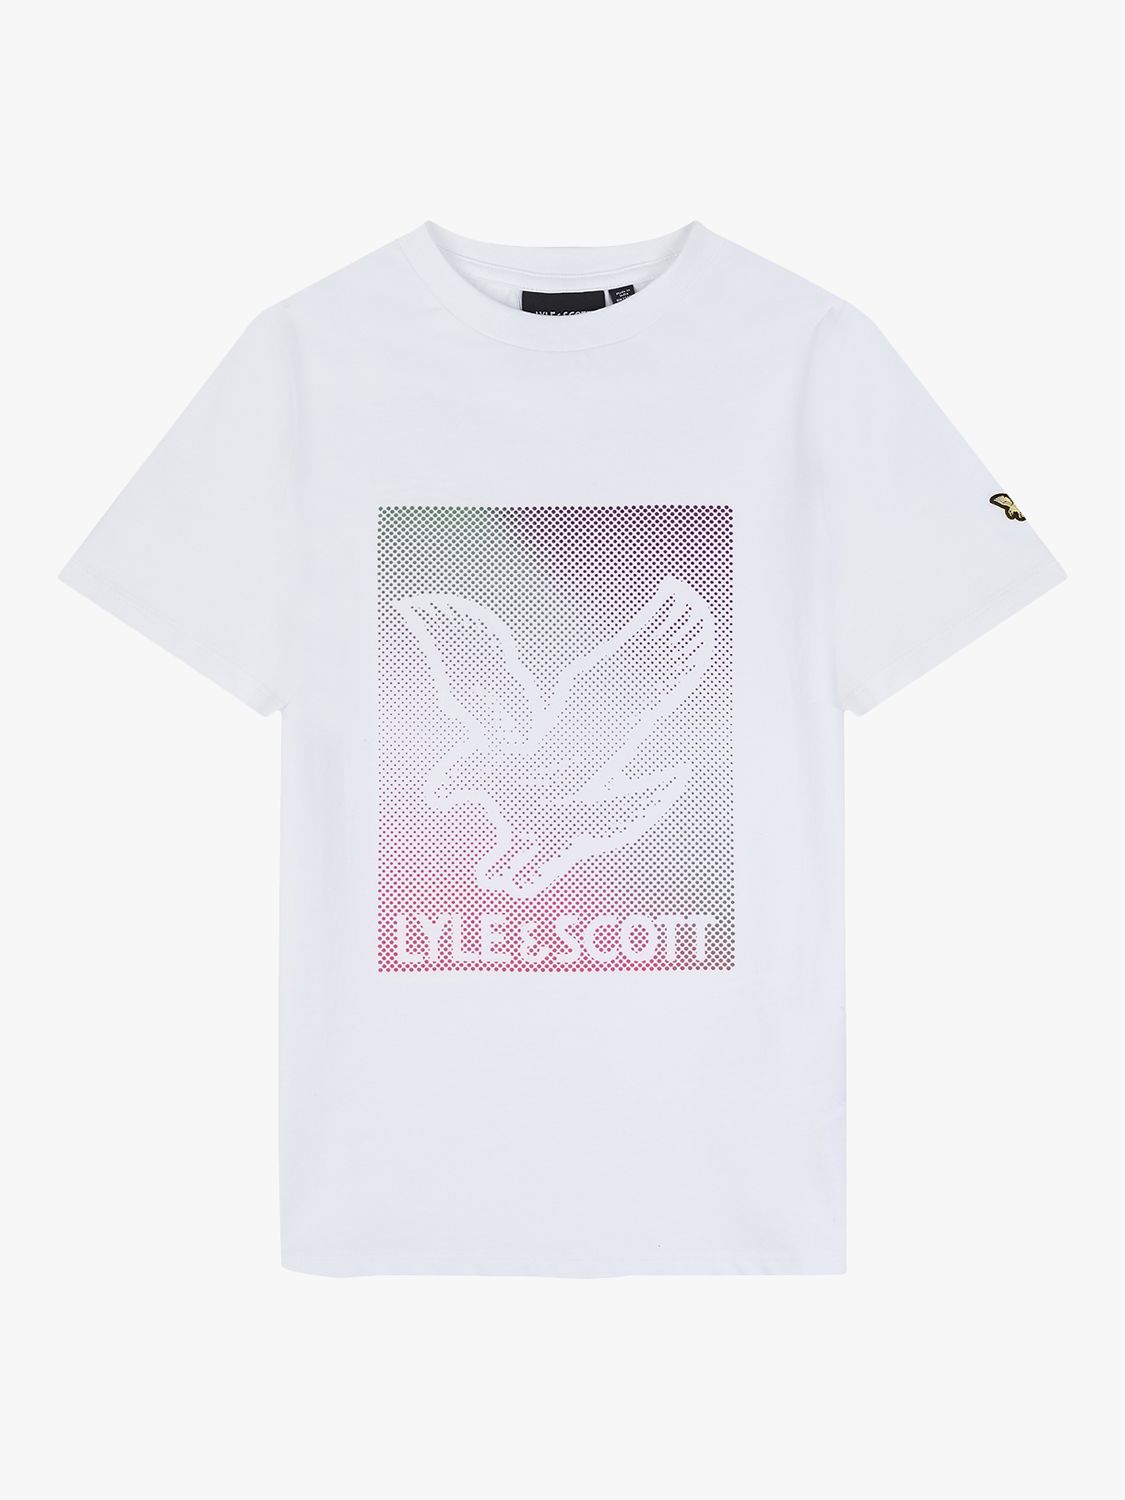 Lyle & Scott Kids' Dotted Eagle Graphic T-Shirt, White/Multi, 12-13 years